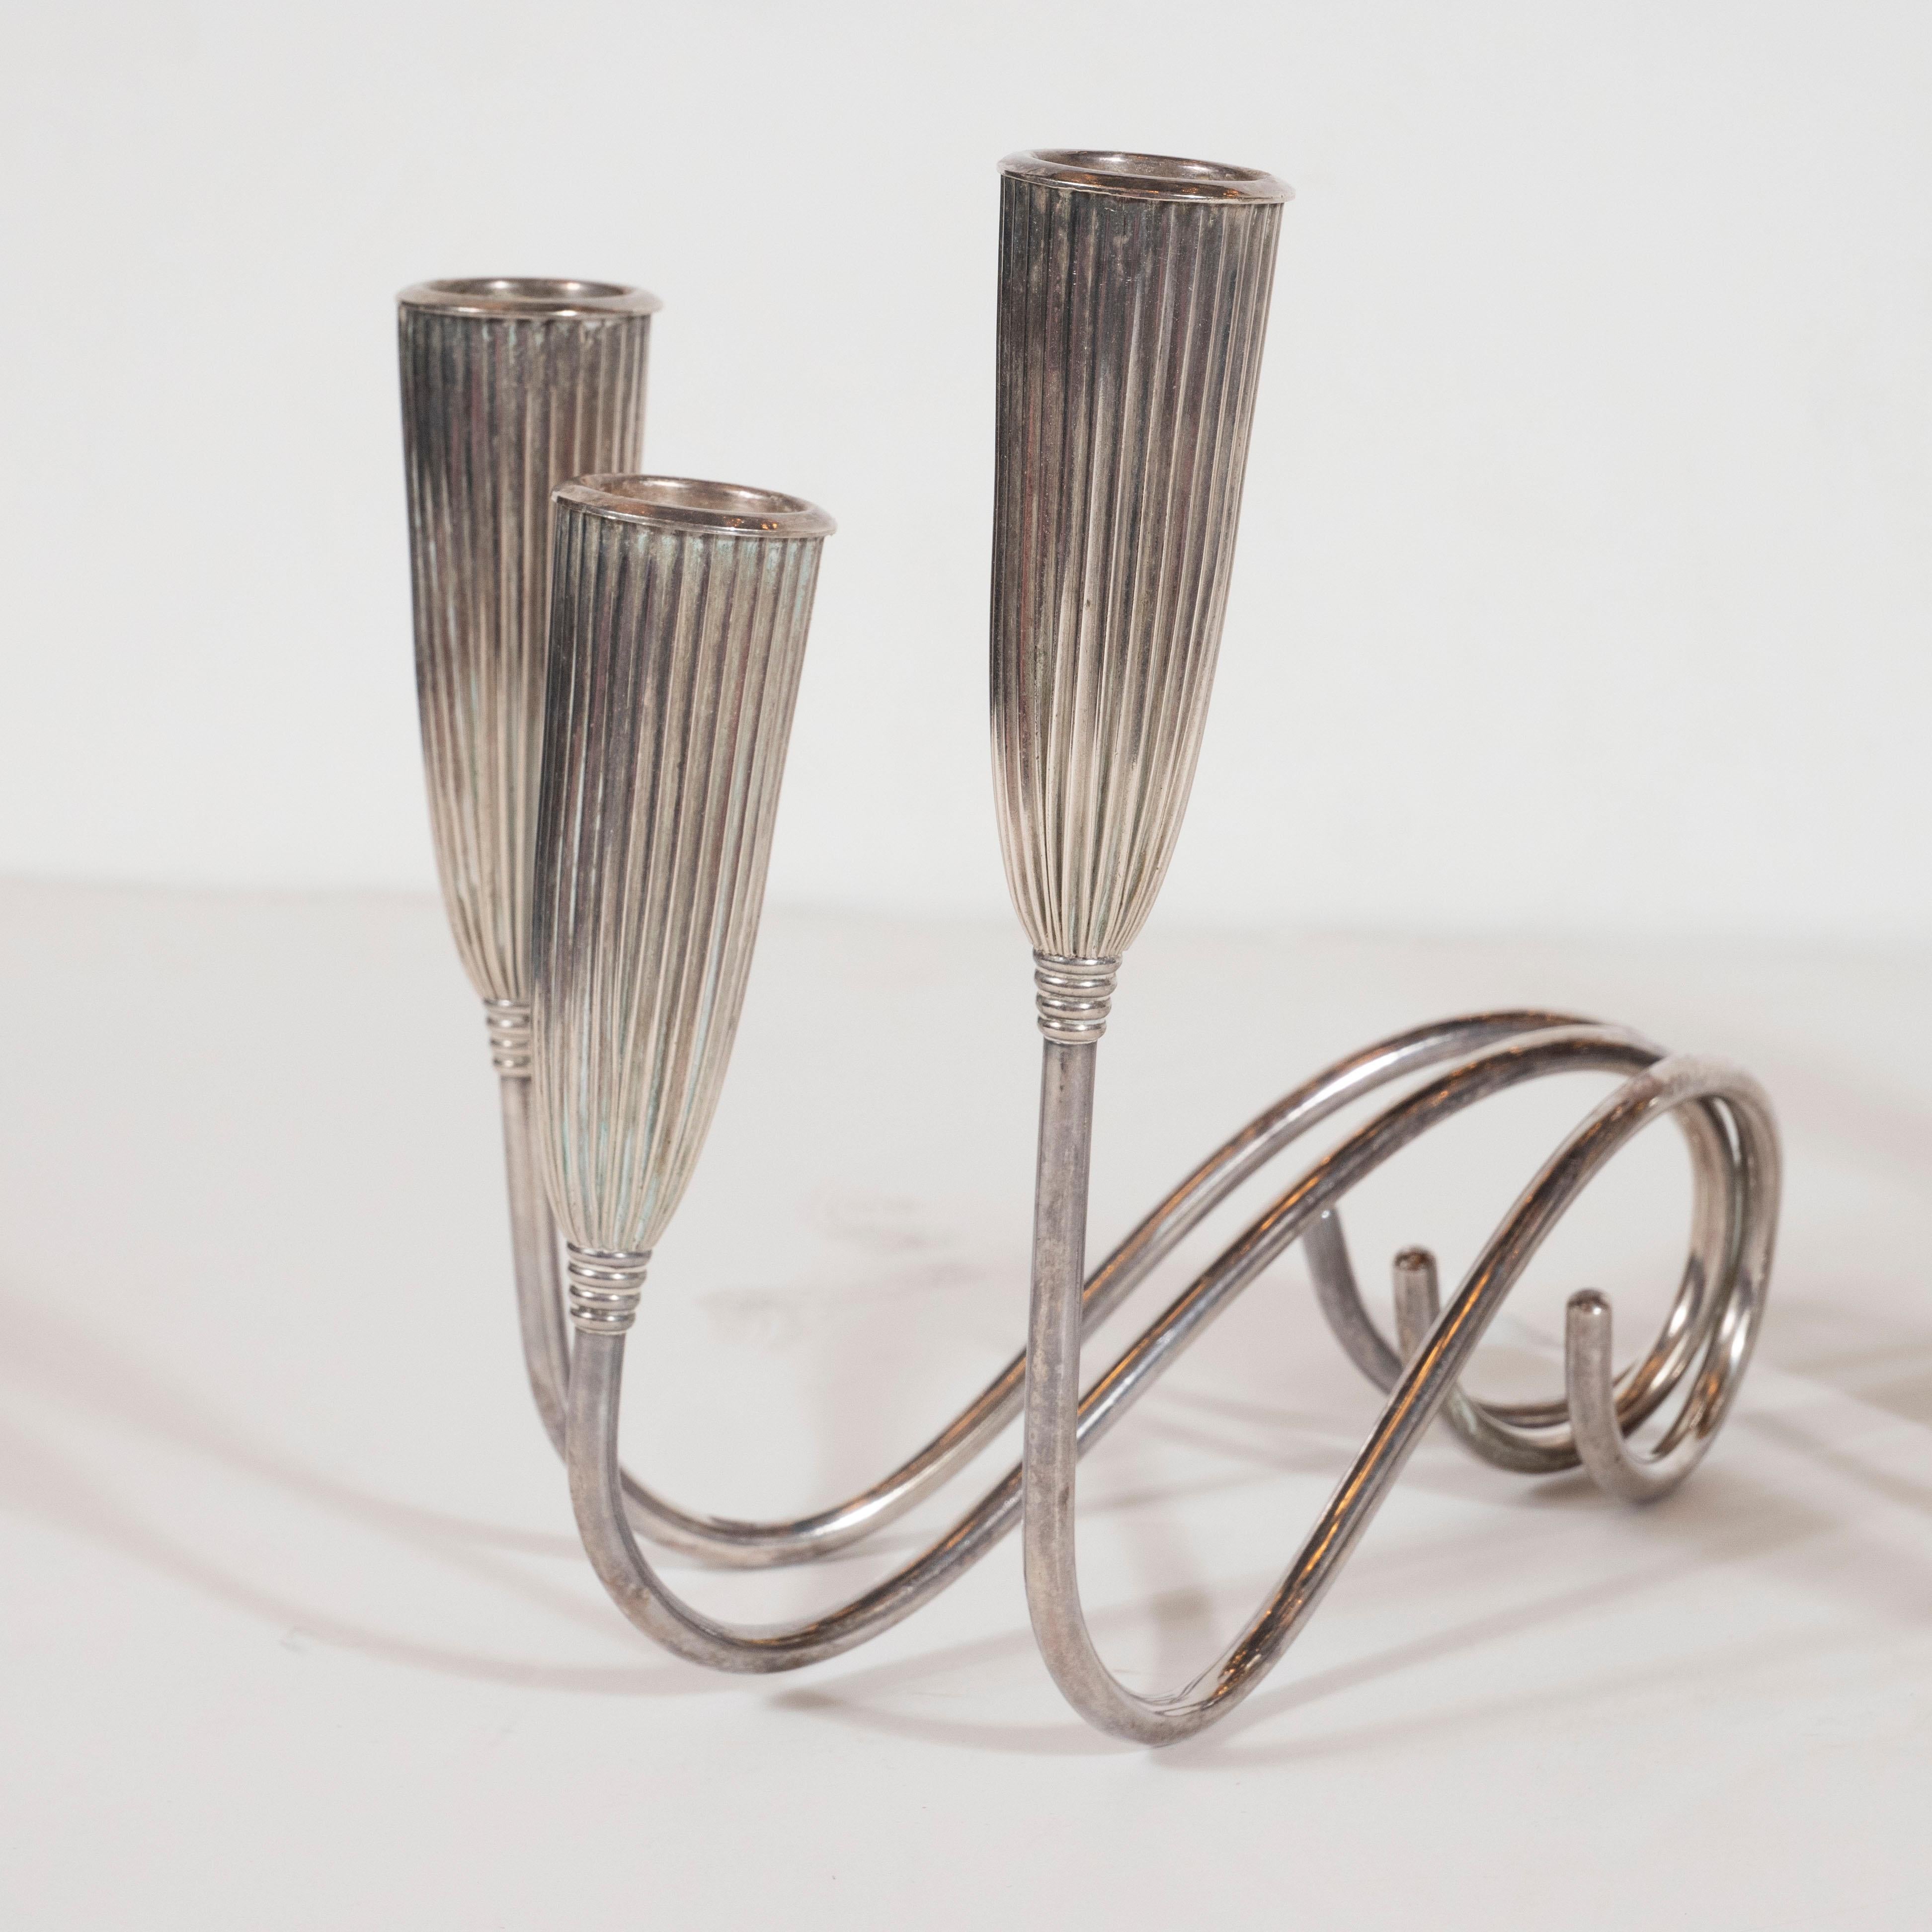 American Pair of Art Deco Triple Branch Fluted Silver Plated Candlesticks by Napier